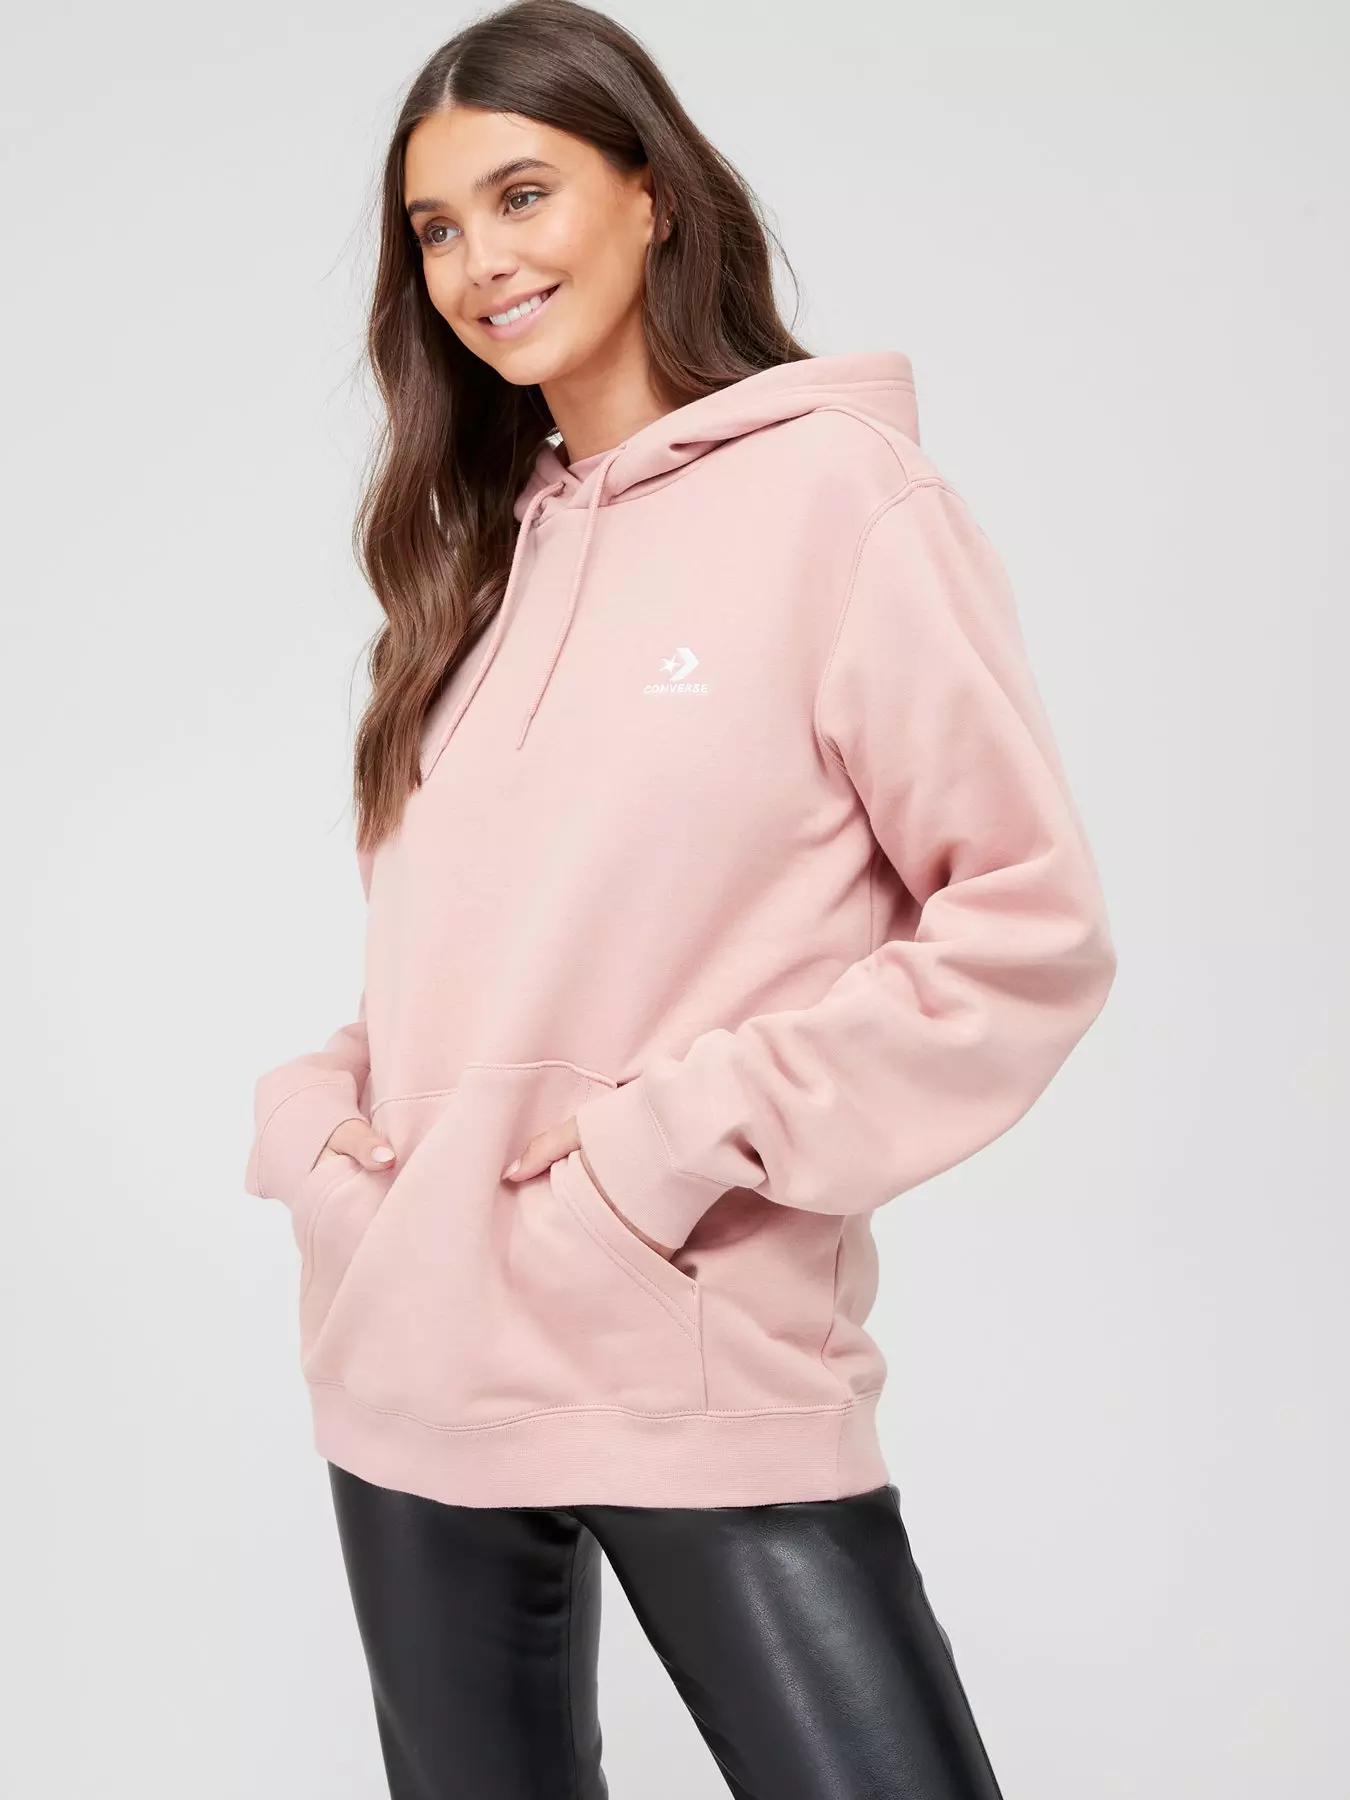 Star Hoodie Embroidered - Converse Pink Chevron